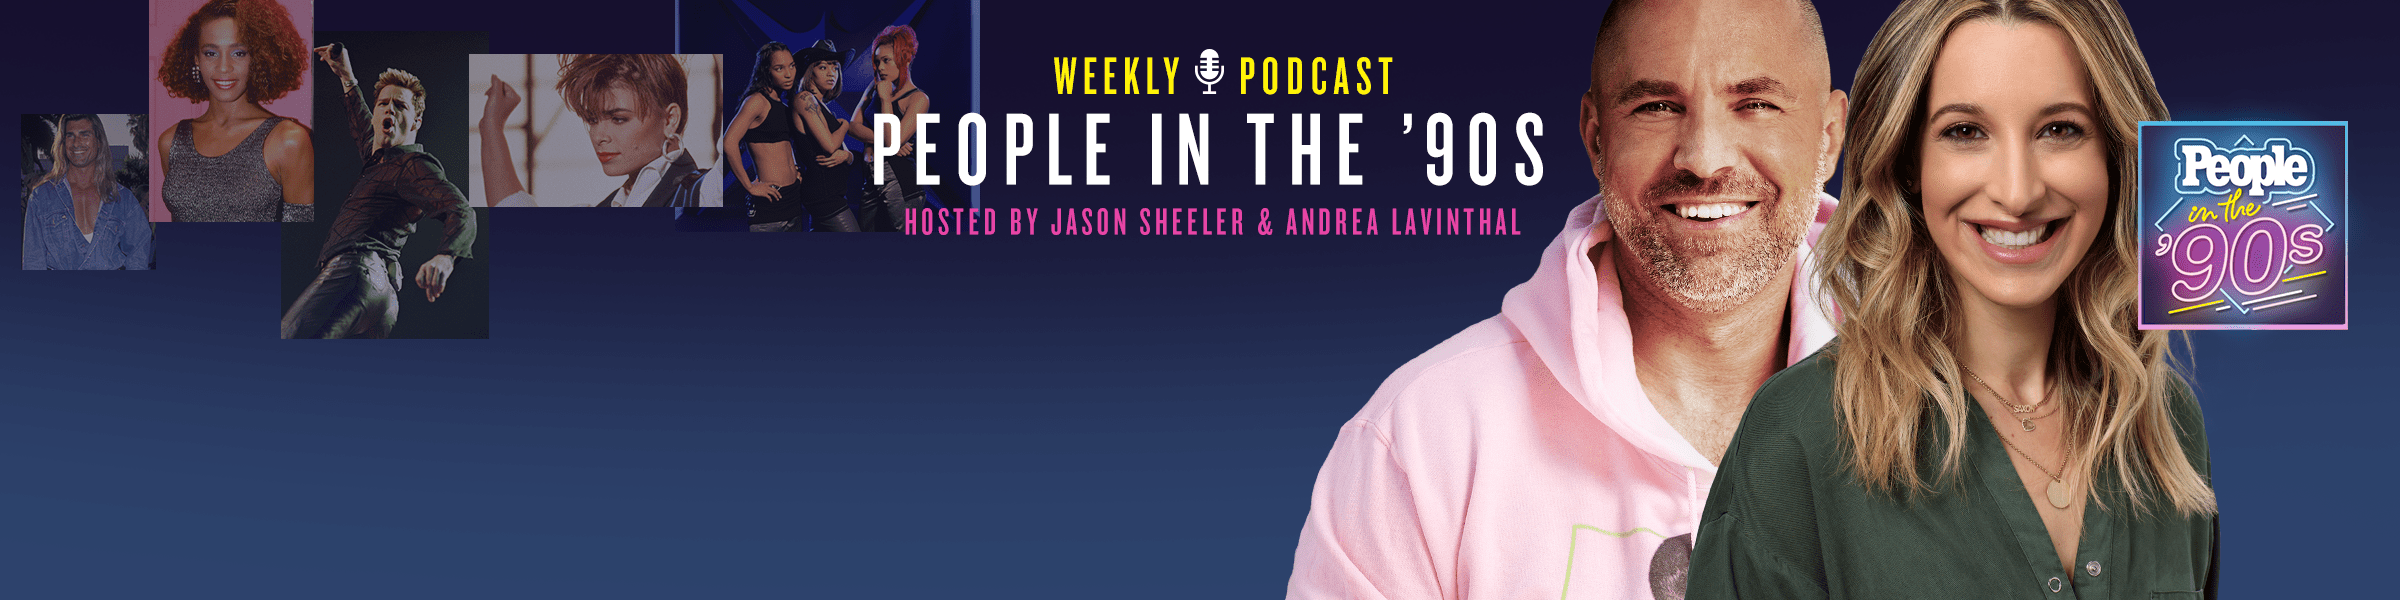 People in the 90s podcast header image